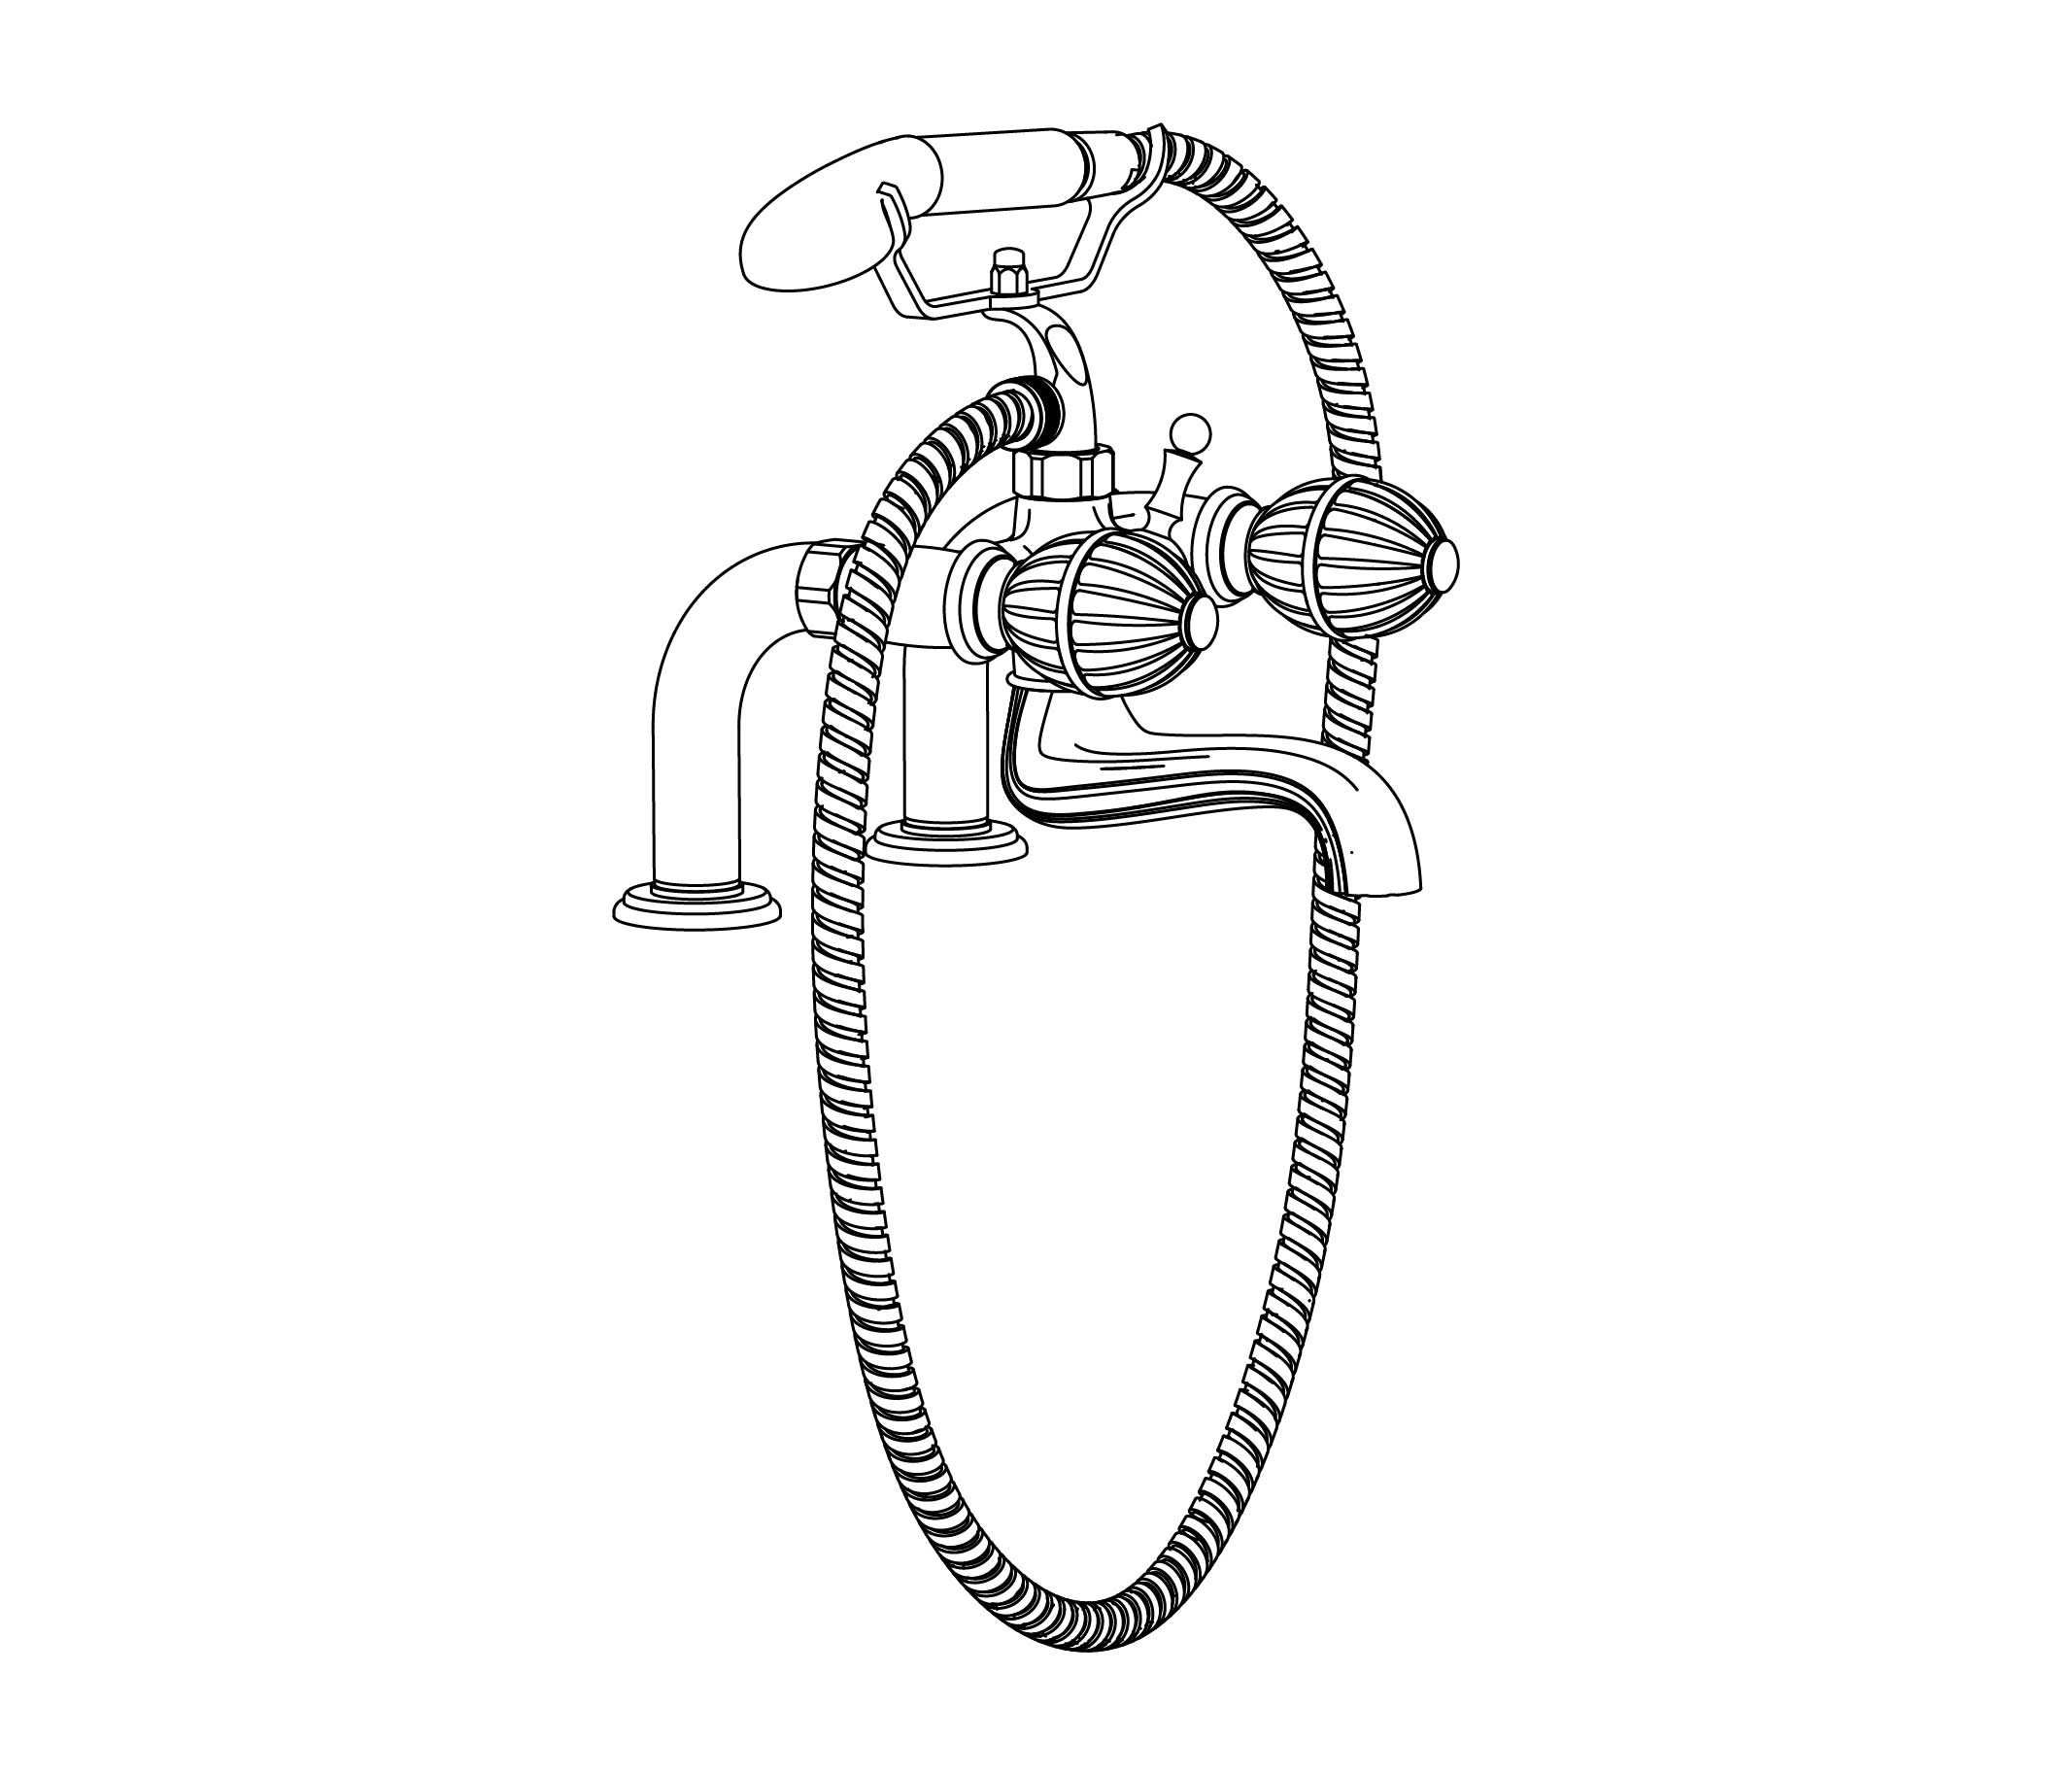 C71-3306 Rim mounted bath and shower mixer